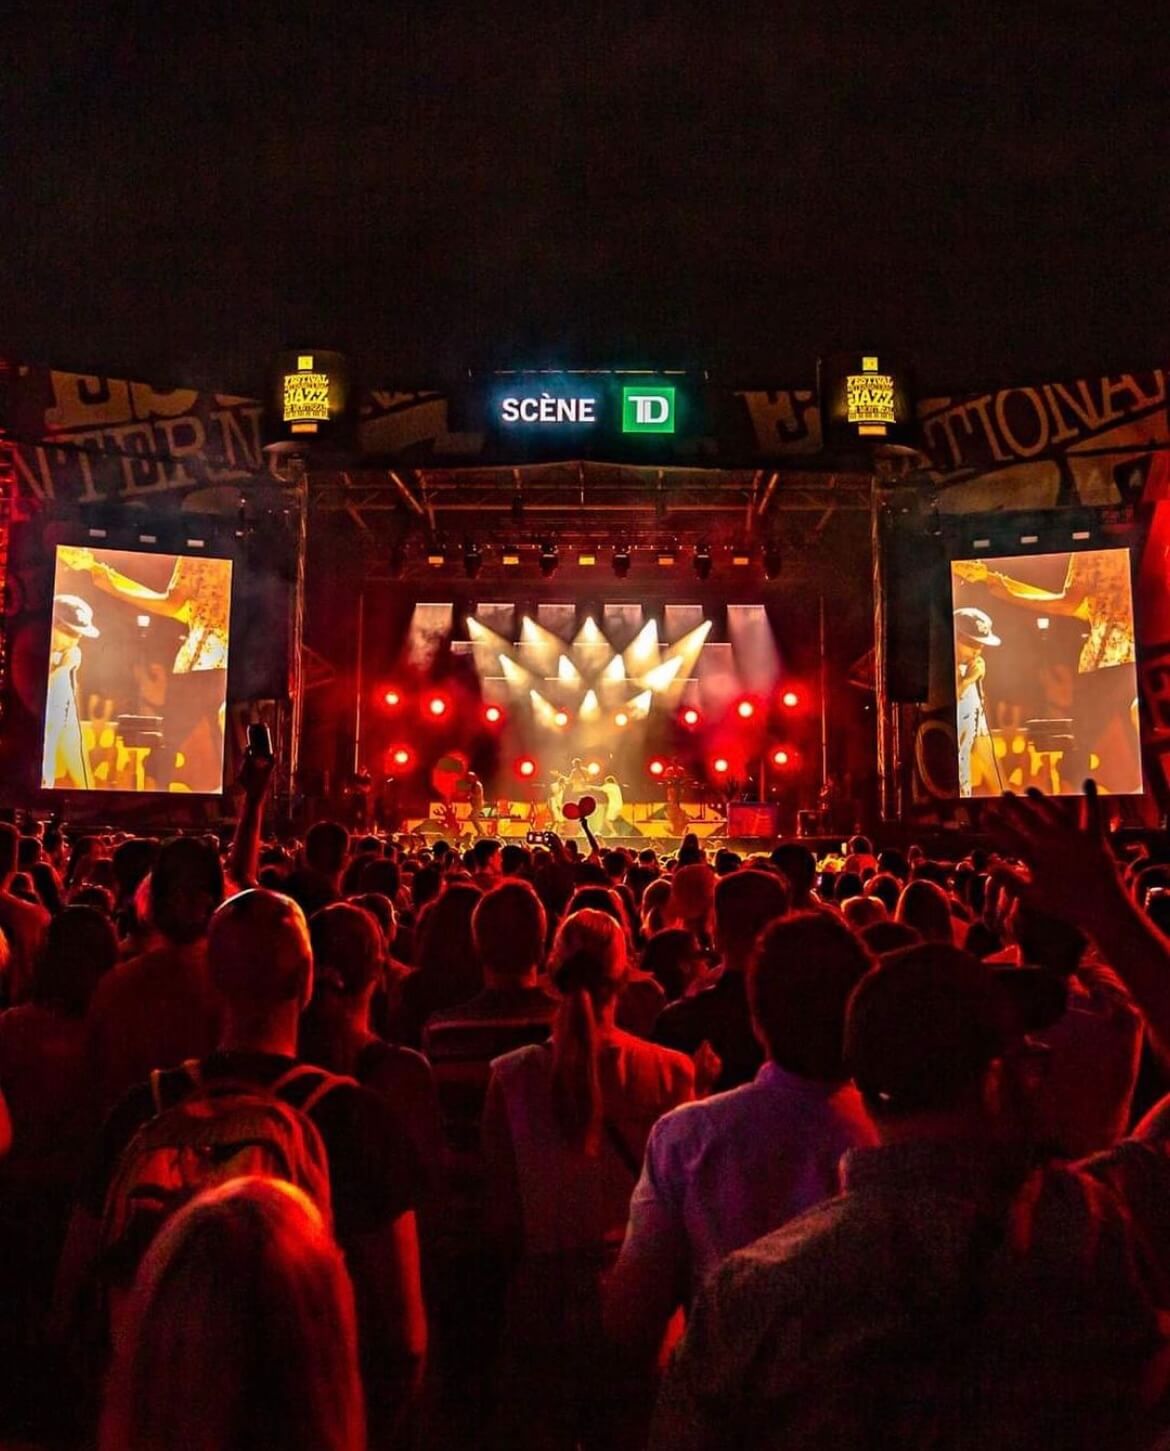 A lively crowd enjoying an outdoor concert, with vibrant stage lights illuminating the performers at a festival sponsored by TD.